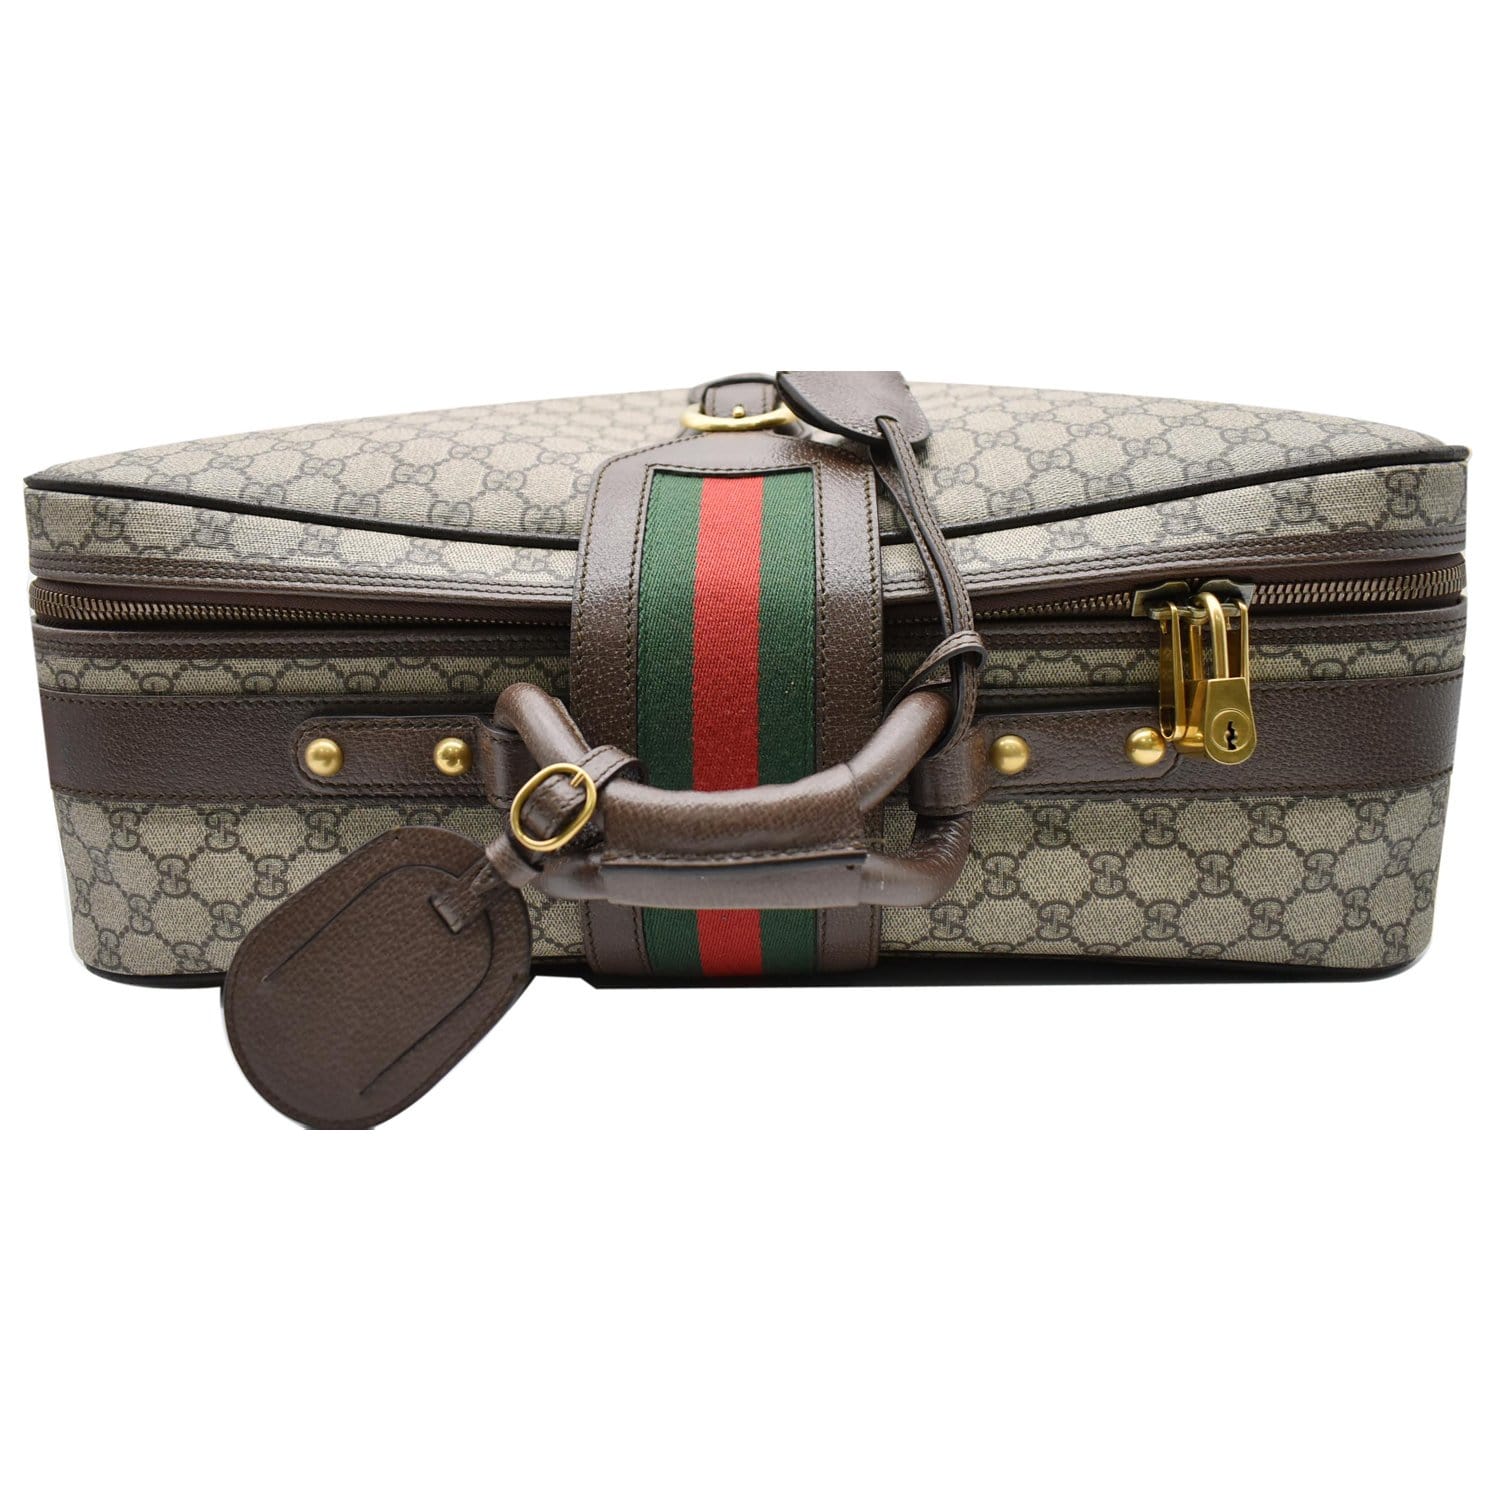 Shop GUCCI Unisex Luggage & Travel Bags by selectM